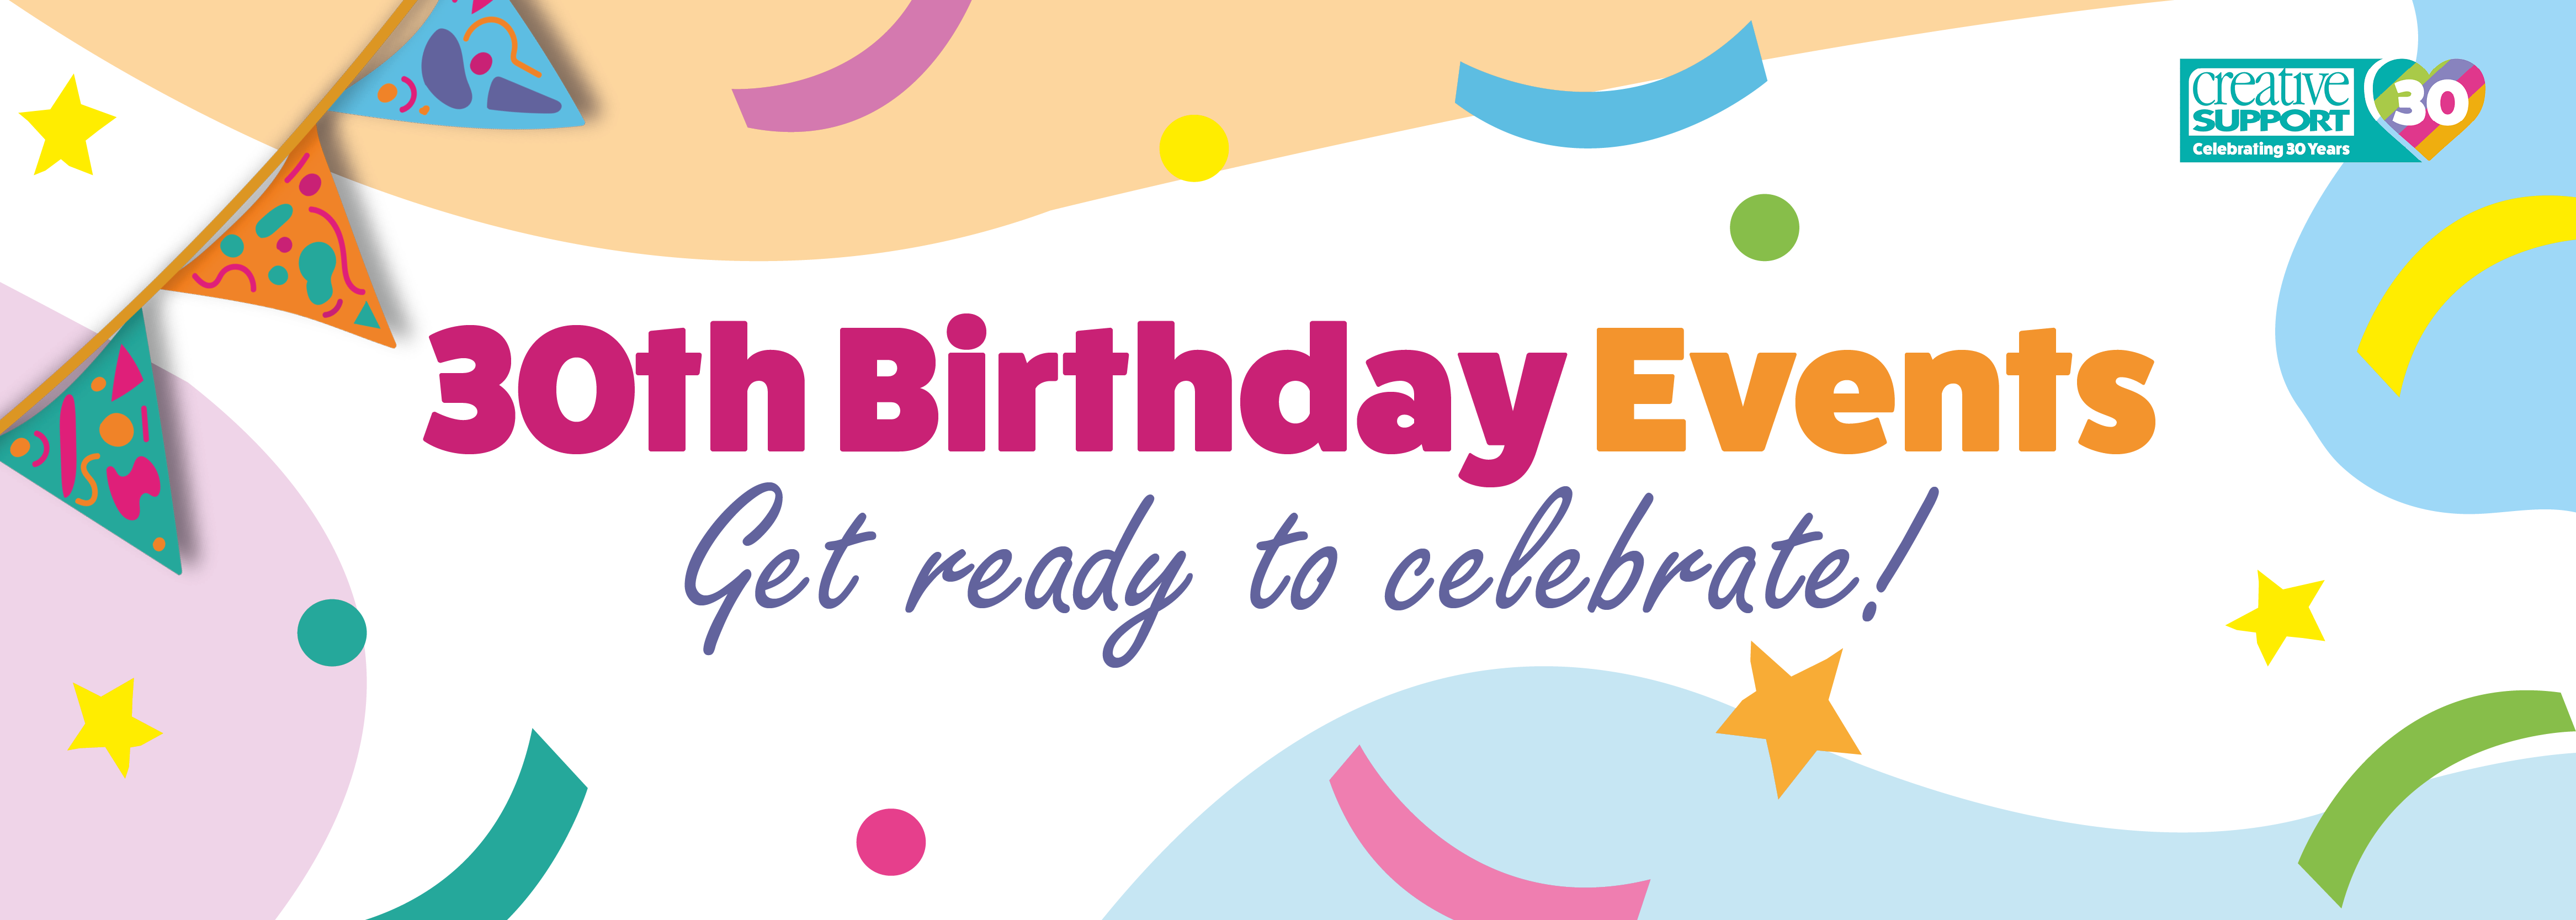 30th Birthday Events – Get Ready to Celebrate!